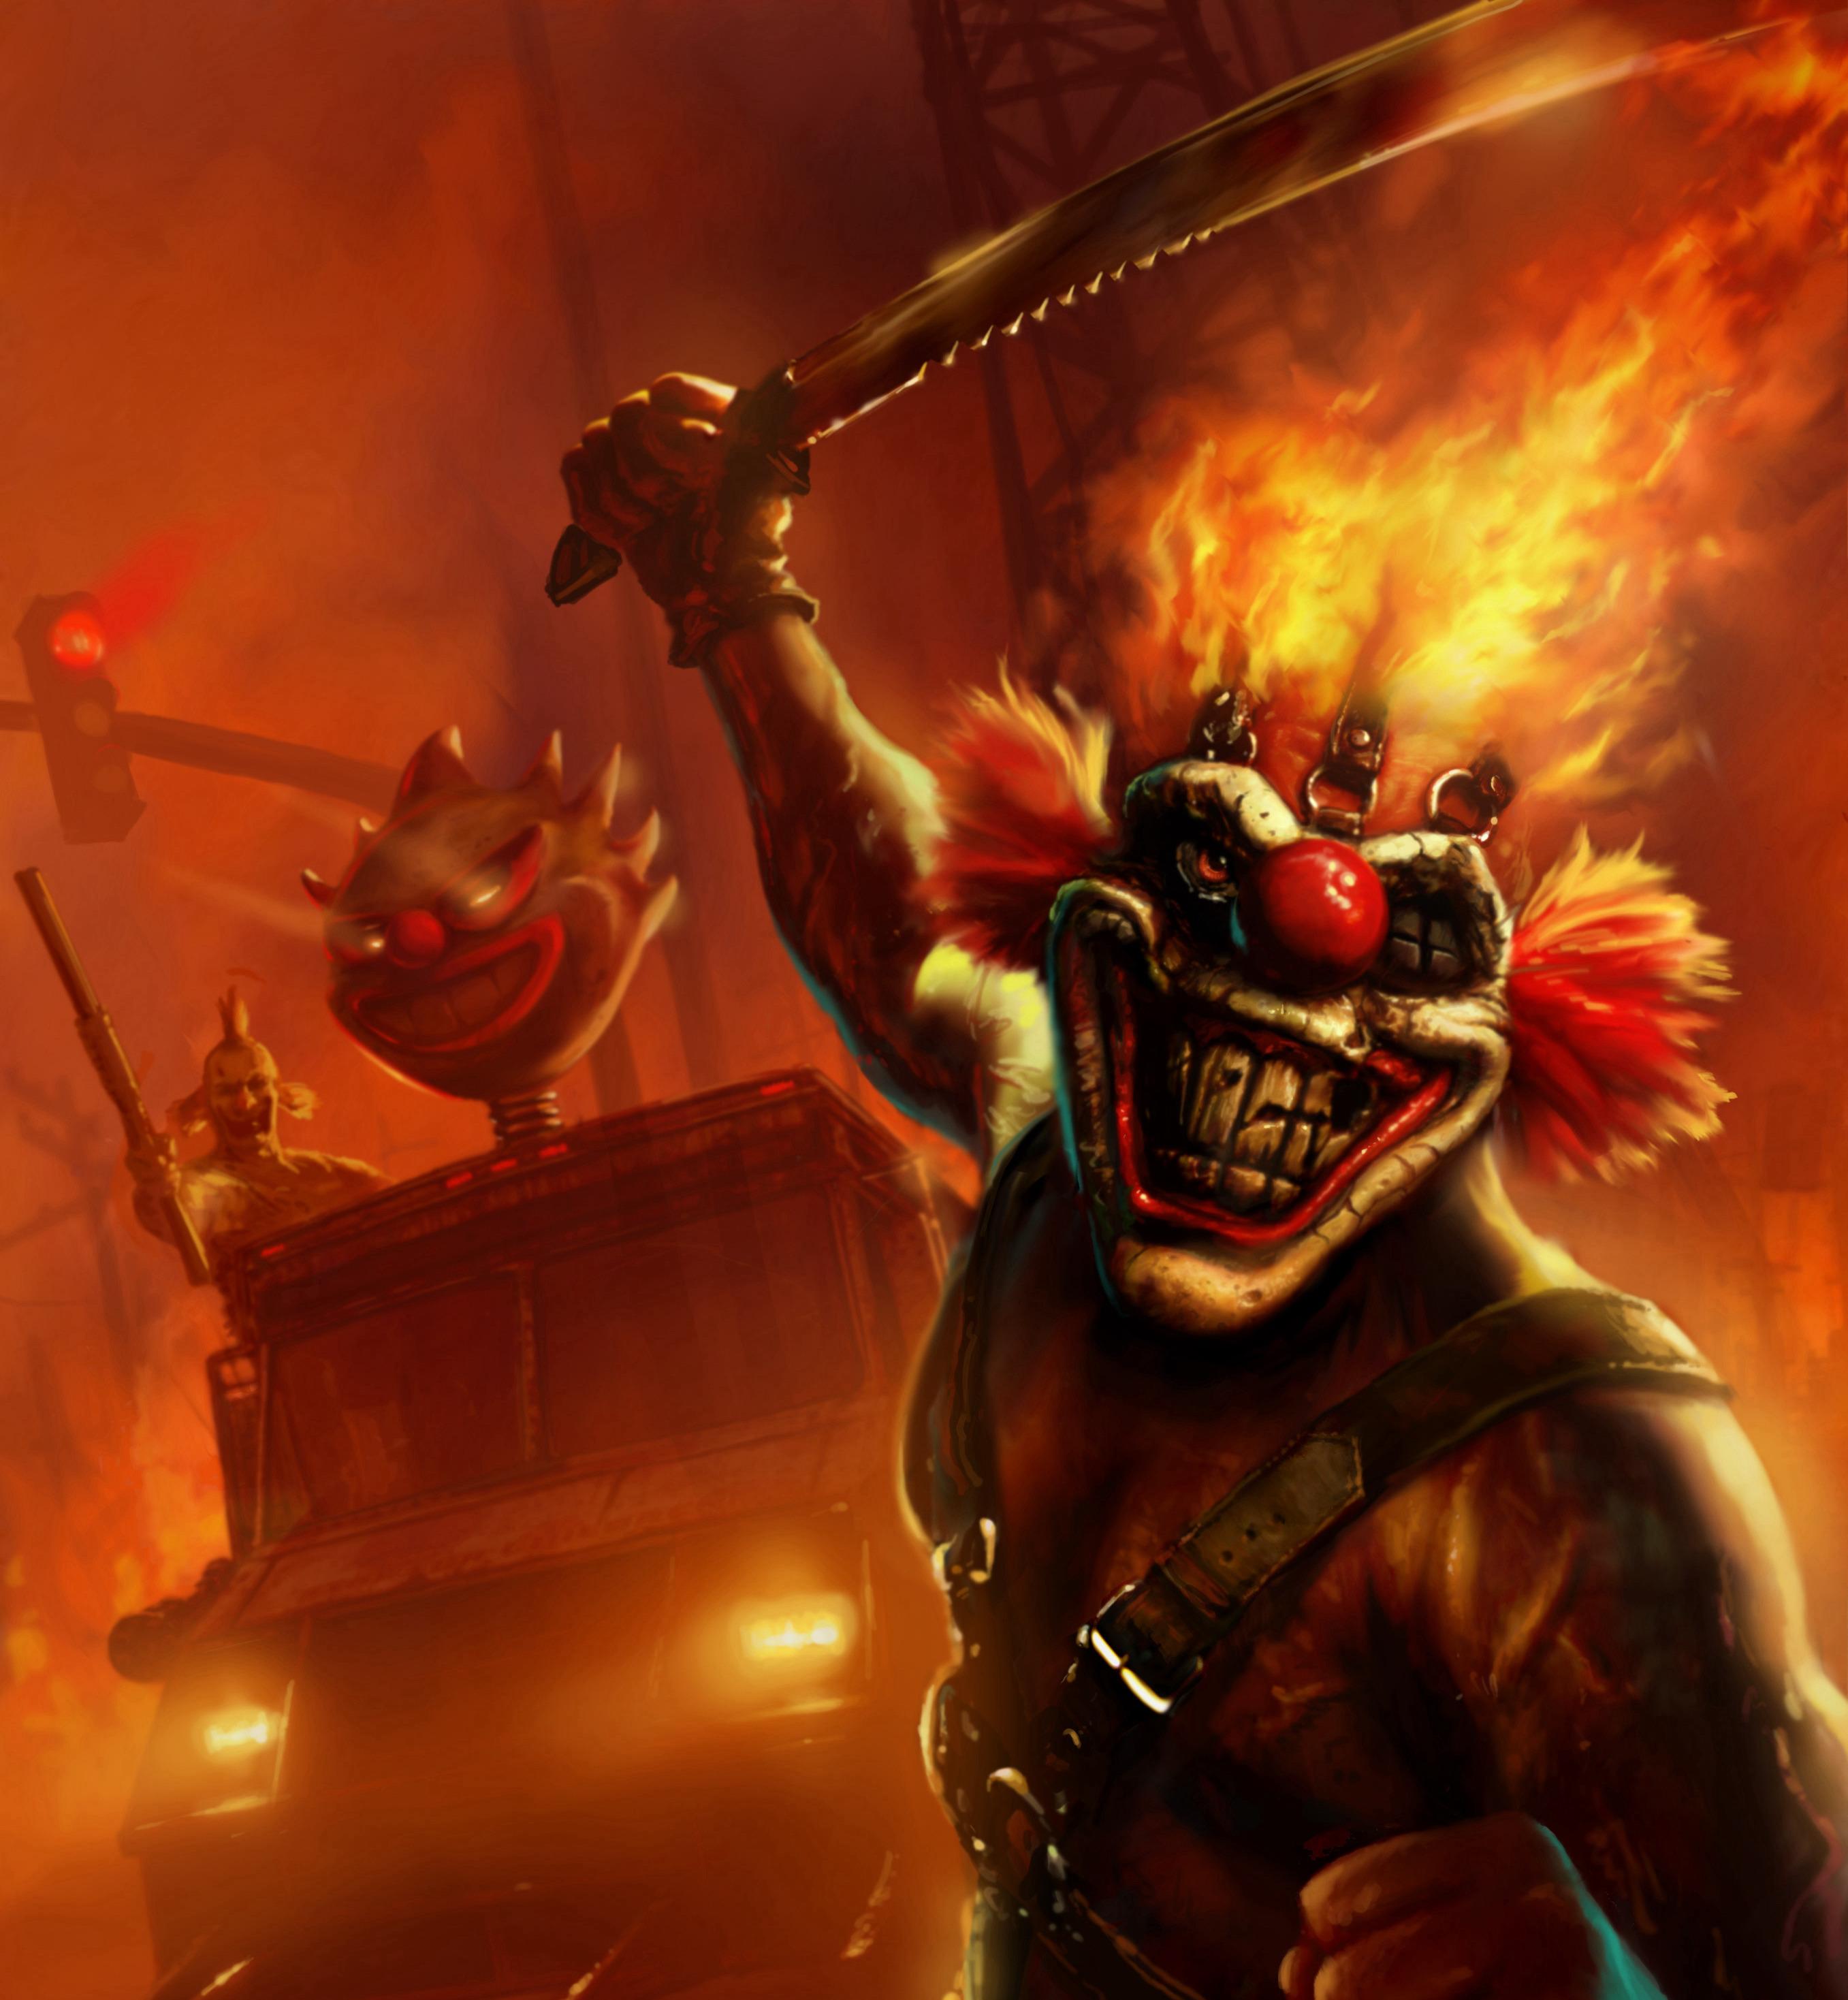 Twisted Metal: Premiere Date, Cast And Other Things We Know About